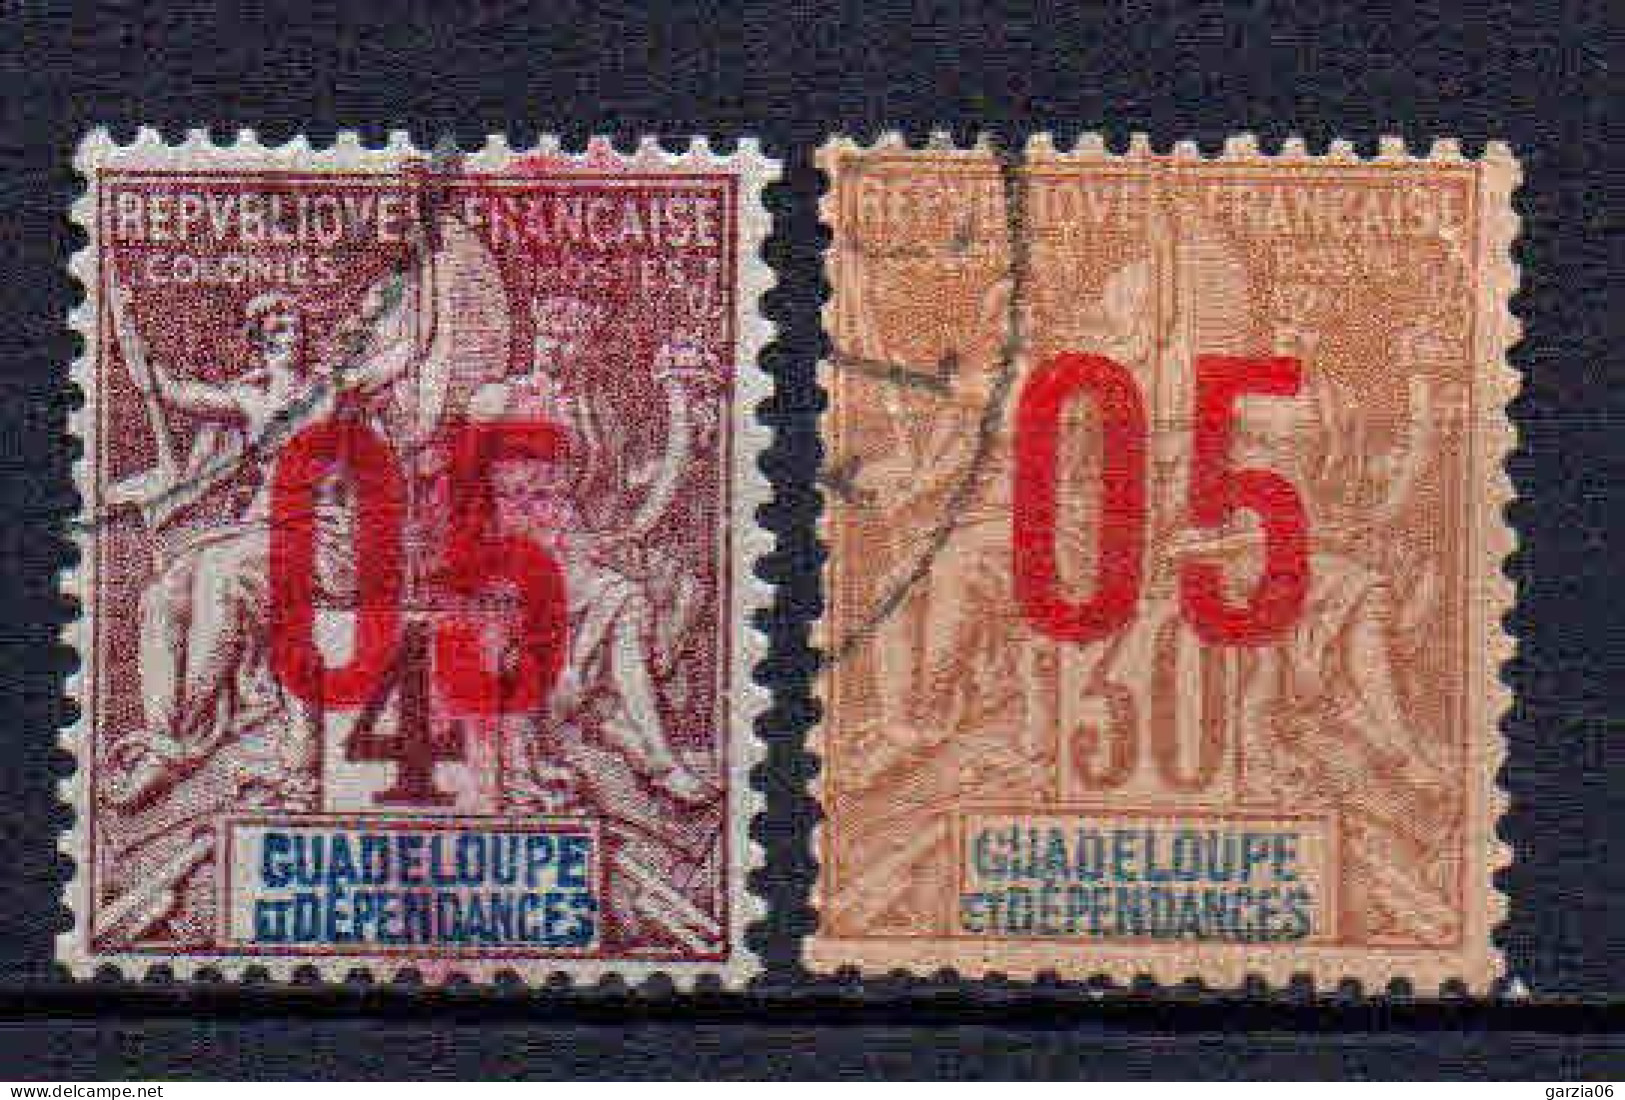 Guadeloupe  - 1912 - Tb Antérieur Surch  - N° 72/73  - Oblit - Used - Used Stamps